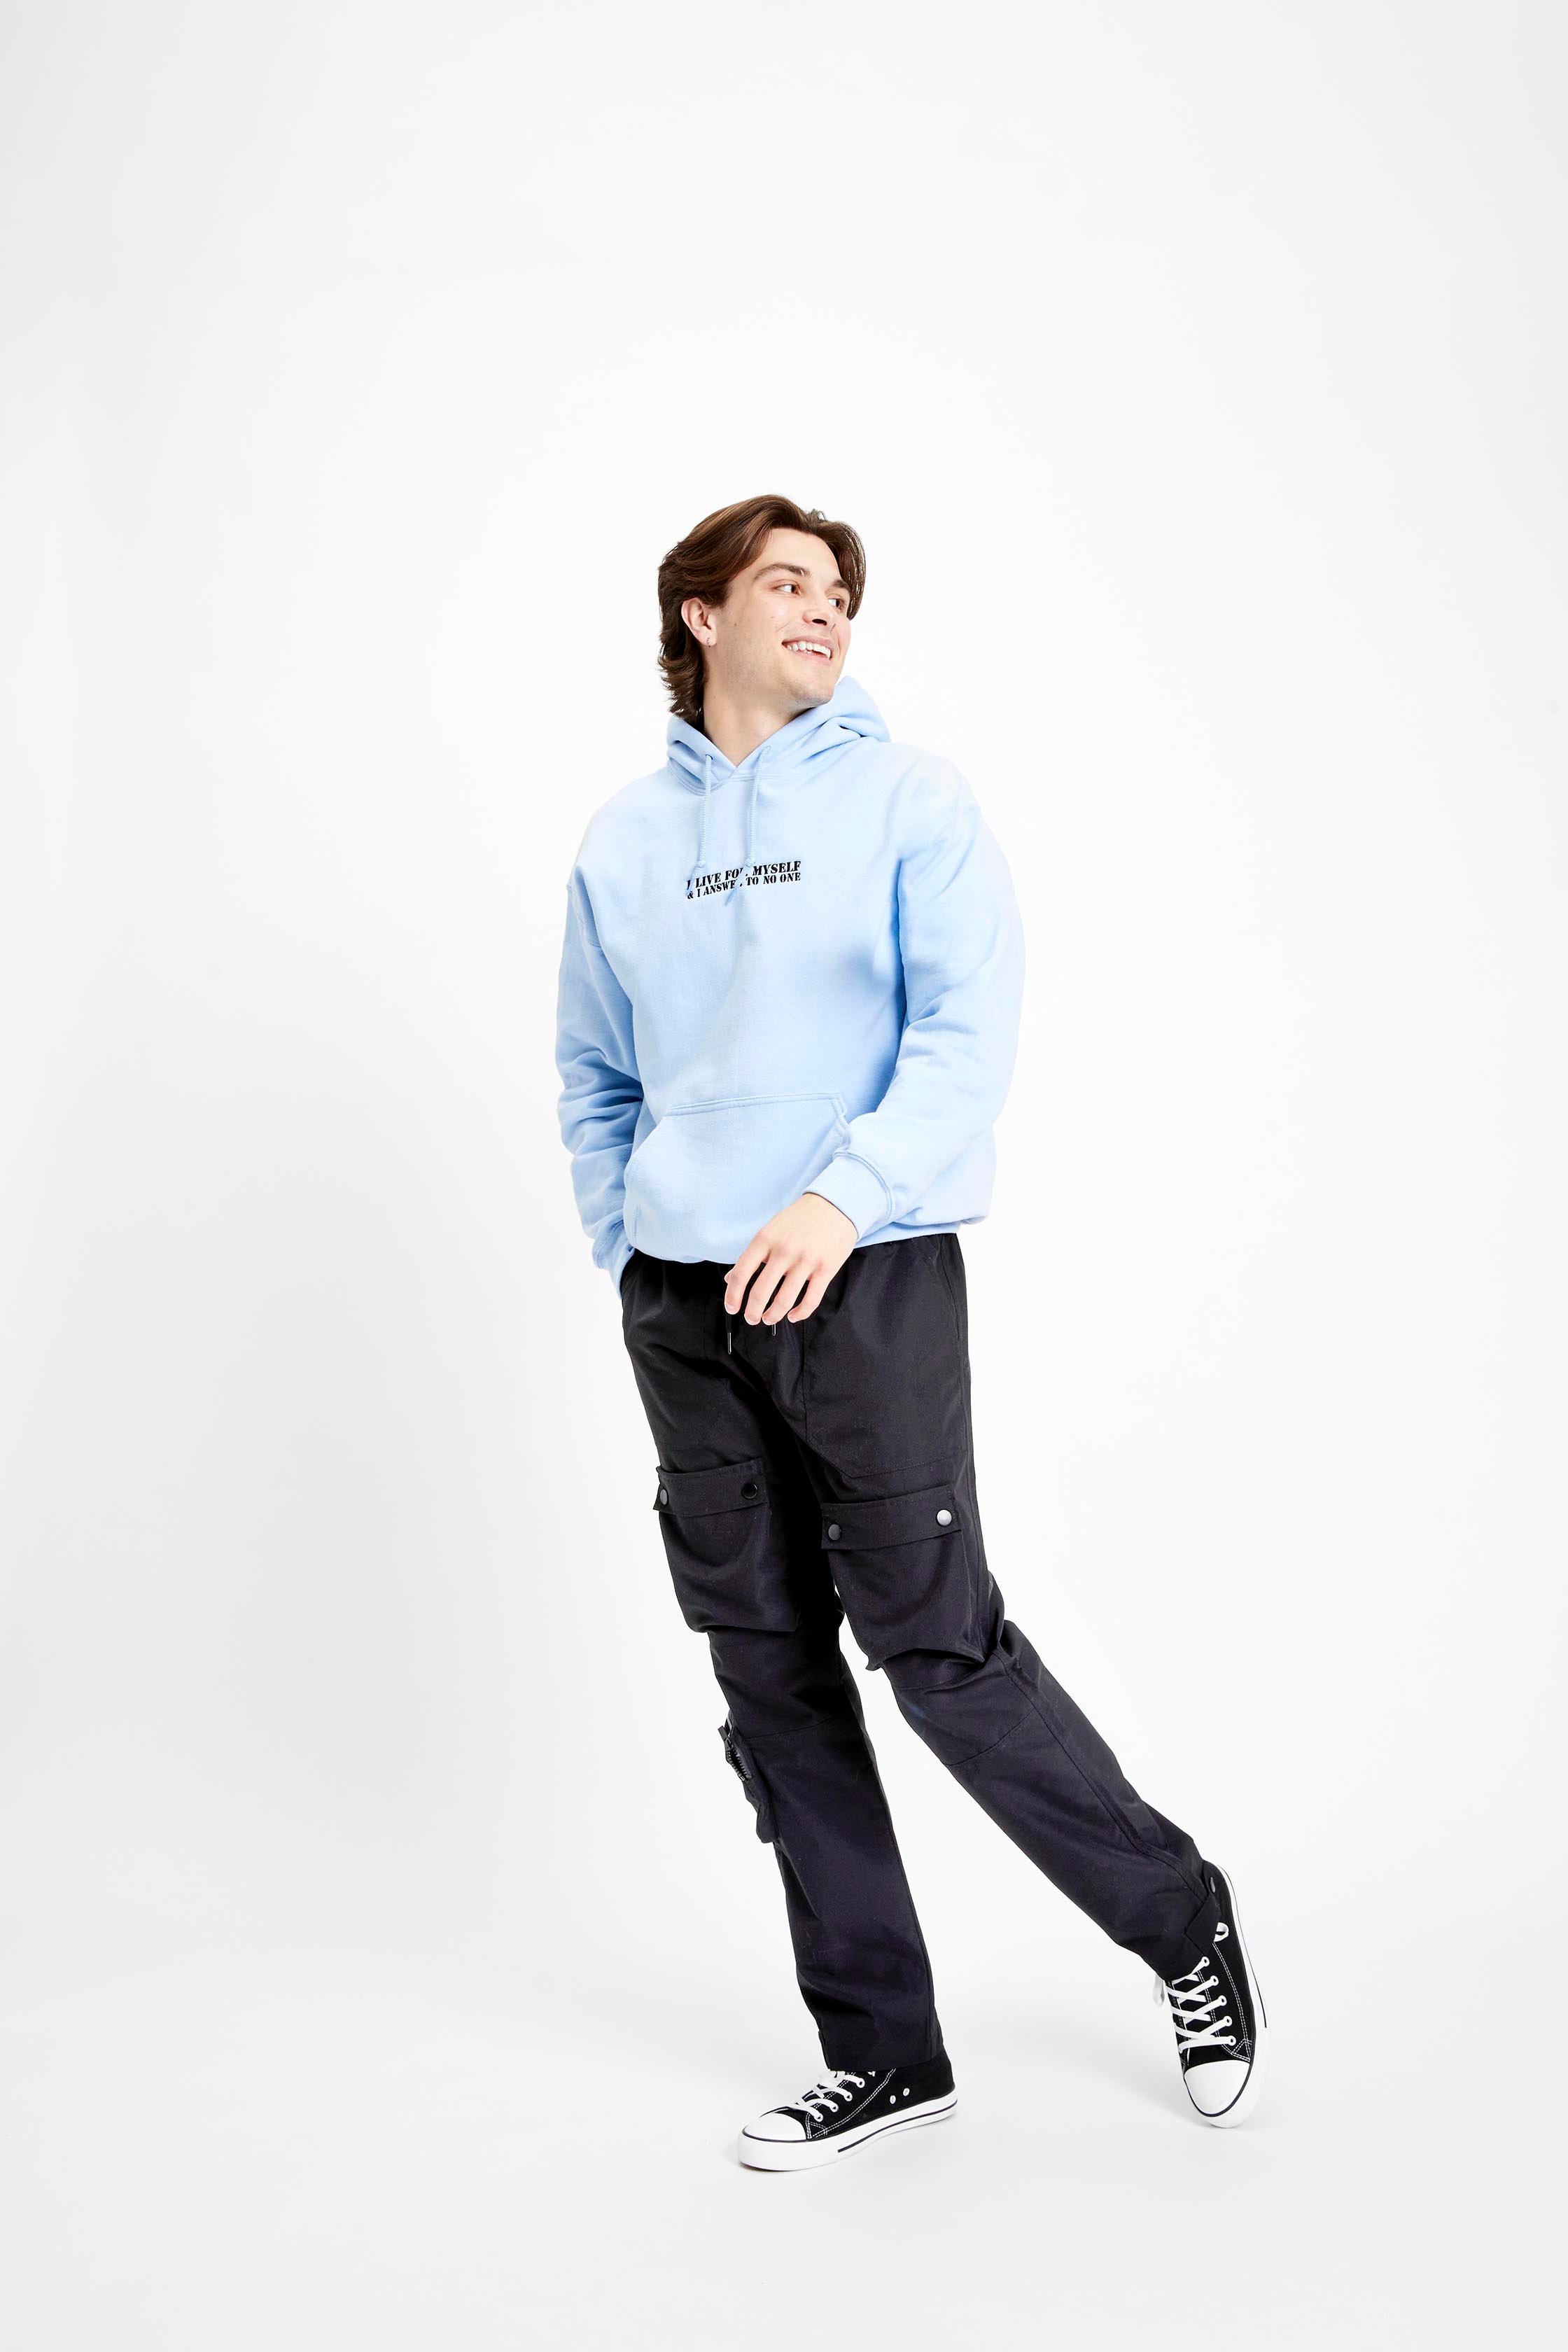 A male model wearing black cargo pants and a baby blue hoodie from rue21